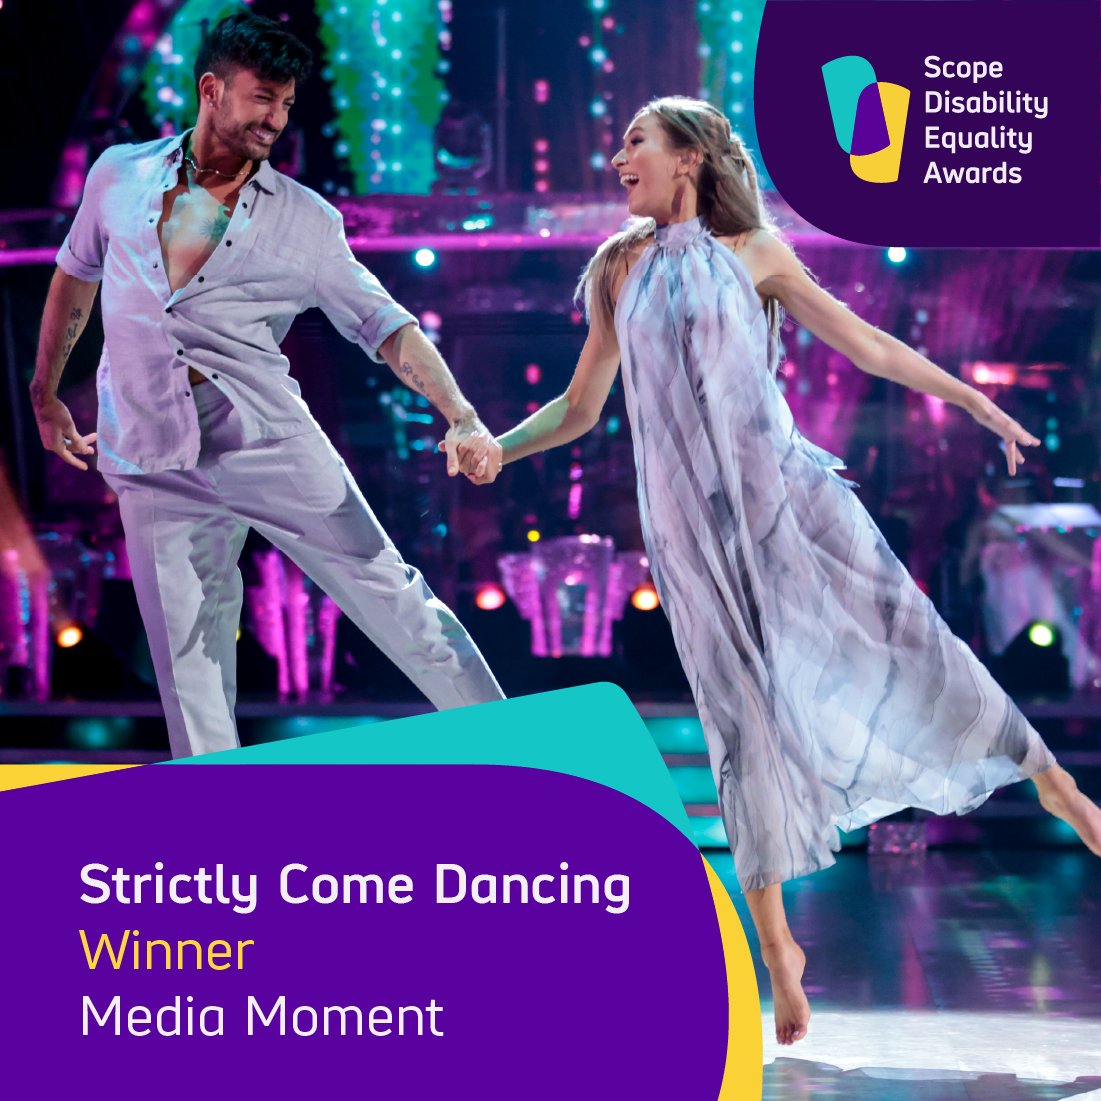 🏆 Our Media Moment award goes to @bbcstrictly! In 2021, @RoseAylingEllis and @PerniceGiovann1 performed part of their dance in silence. This tribute to the deaf community enchanted the audience, earning the pair a BAFTA. We’re proud to honour such a special moment 💃